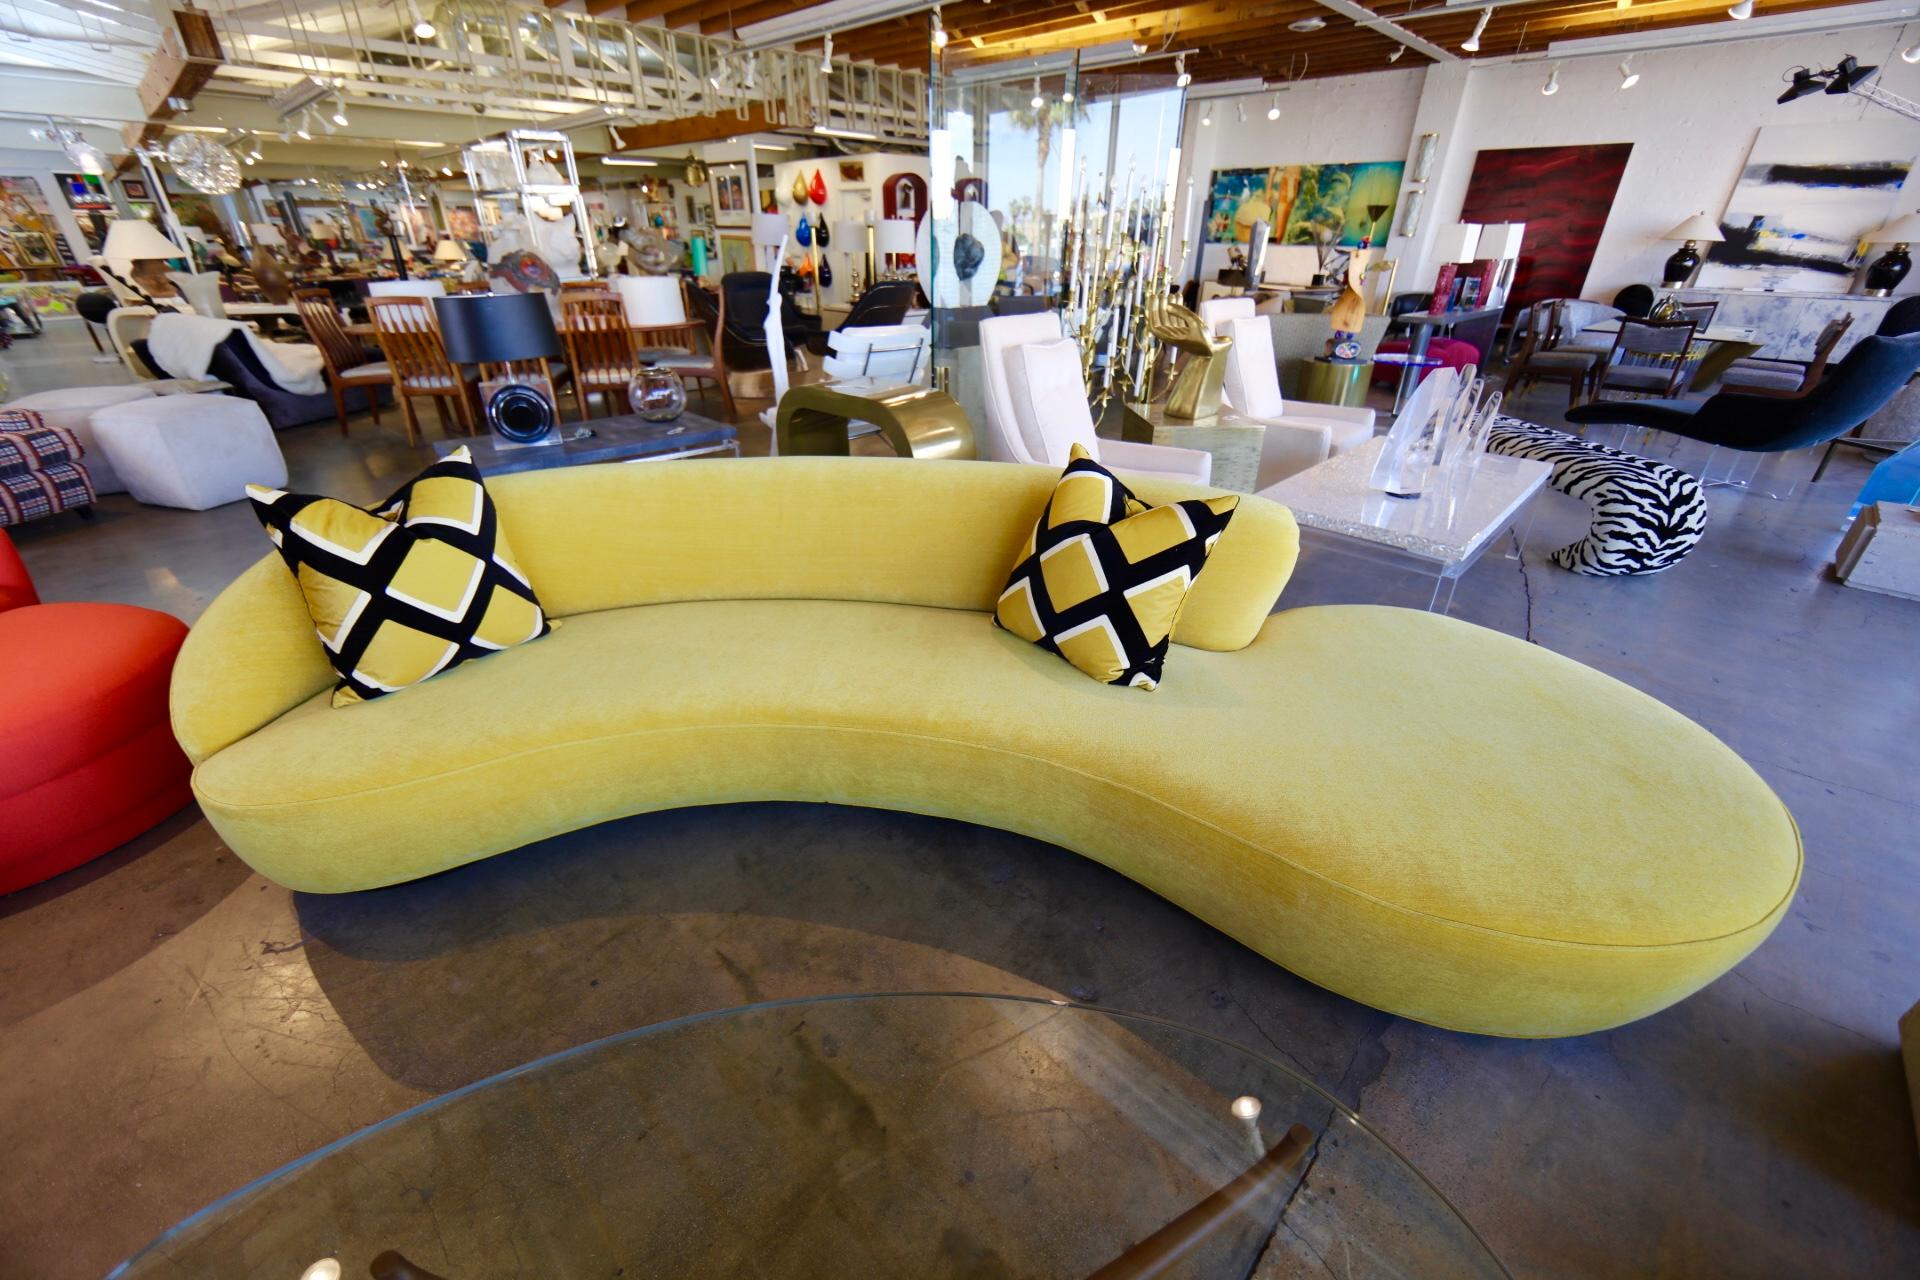 A Vladimir Kagan designed cloud sofa in a mustard yellow color. It was purchased a few years ago from Holly Hunt. In very good condition with some minor marks and imperfections.